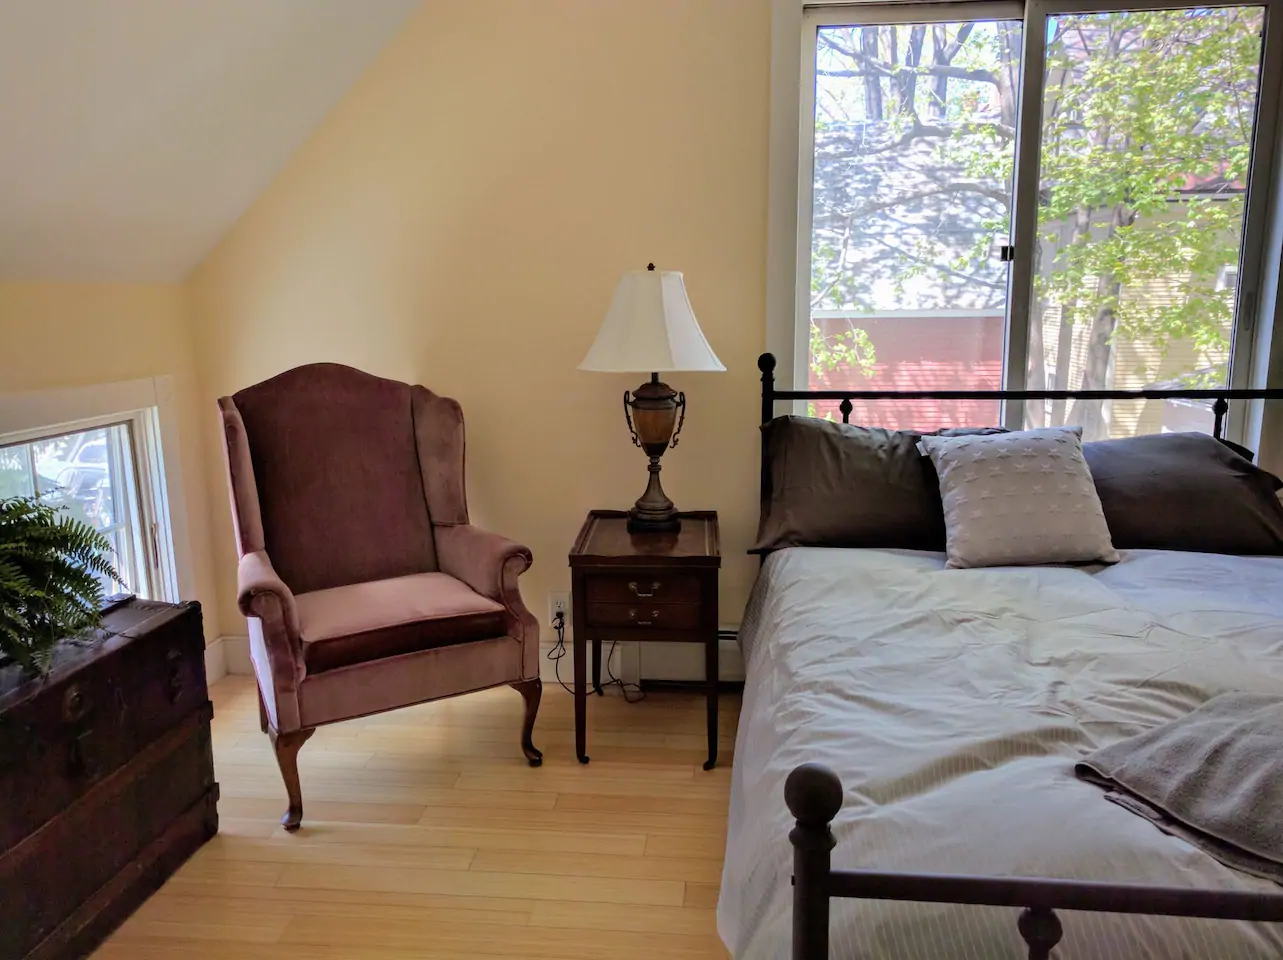 A bedroom with a bed made with cream bedding. A window is above the bed looking out to trees. A red chair sits next to the bed and sidetable with a light.